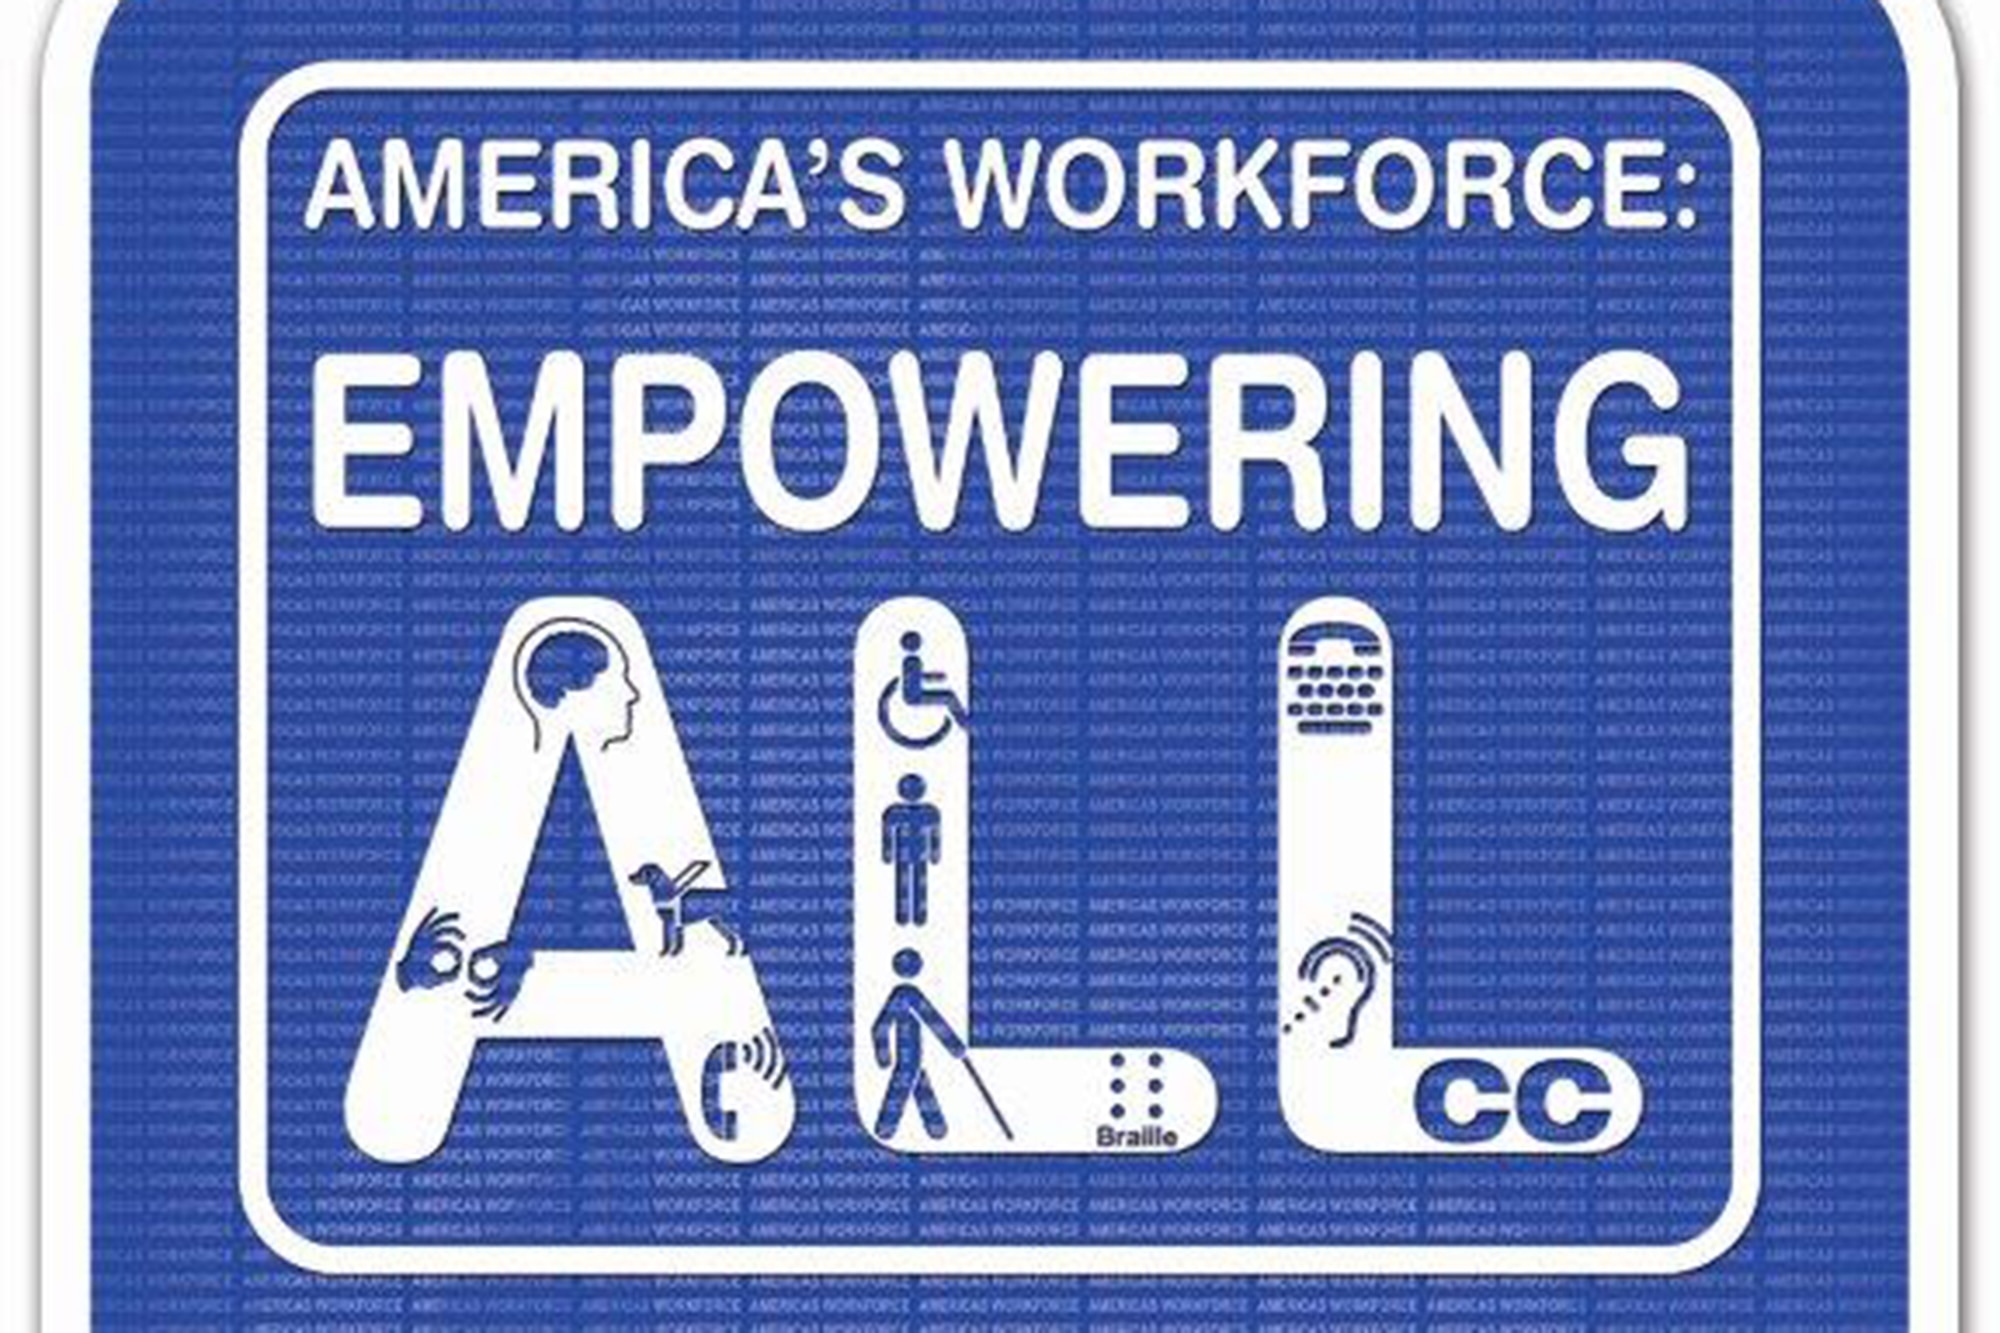 The U.S. Department of Labor developed the theme for this year’s National Disability Employment Awareness Month, “America’s Workforce: Empowering All.”

The DEOMI design team watermarked the image of the International Symbol of Access, also known as the (International) Wheelchair Symbol, as the backdrop of the poster which consists of a blue square overlaid in white with an image of a person in a wheelchair. 

The theme is highlighted in white letters “America’s Workforce: Empowering All.” Within the word ALL are international icons representing different types of disabilities.
Congress originally declared the first week of October as “National Employ the Physically Handicapped Week” in 1945. 

Later, in 1962, the observance dropped the word “physically” to acknowledge that not all disabilities are physical. Federal legislature expanded the observance to a month in 1988, and officially changed the name to National Disability Employment Awareness Month.